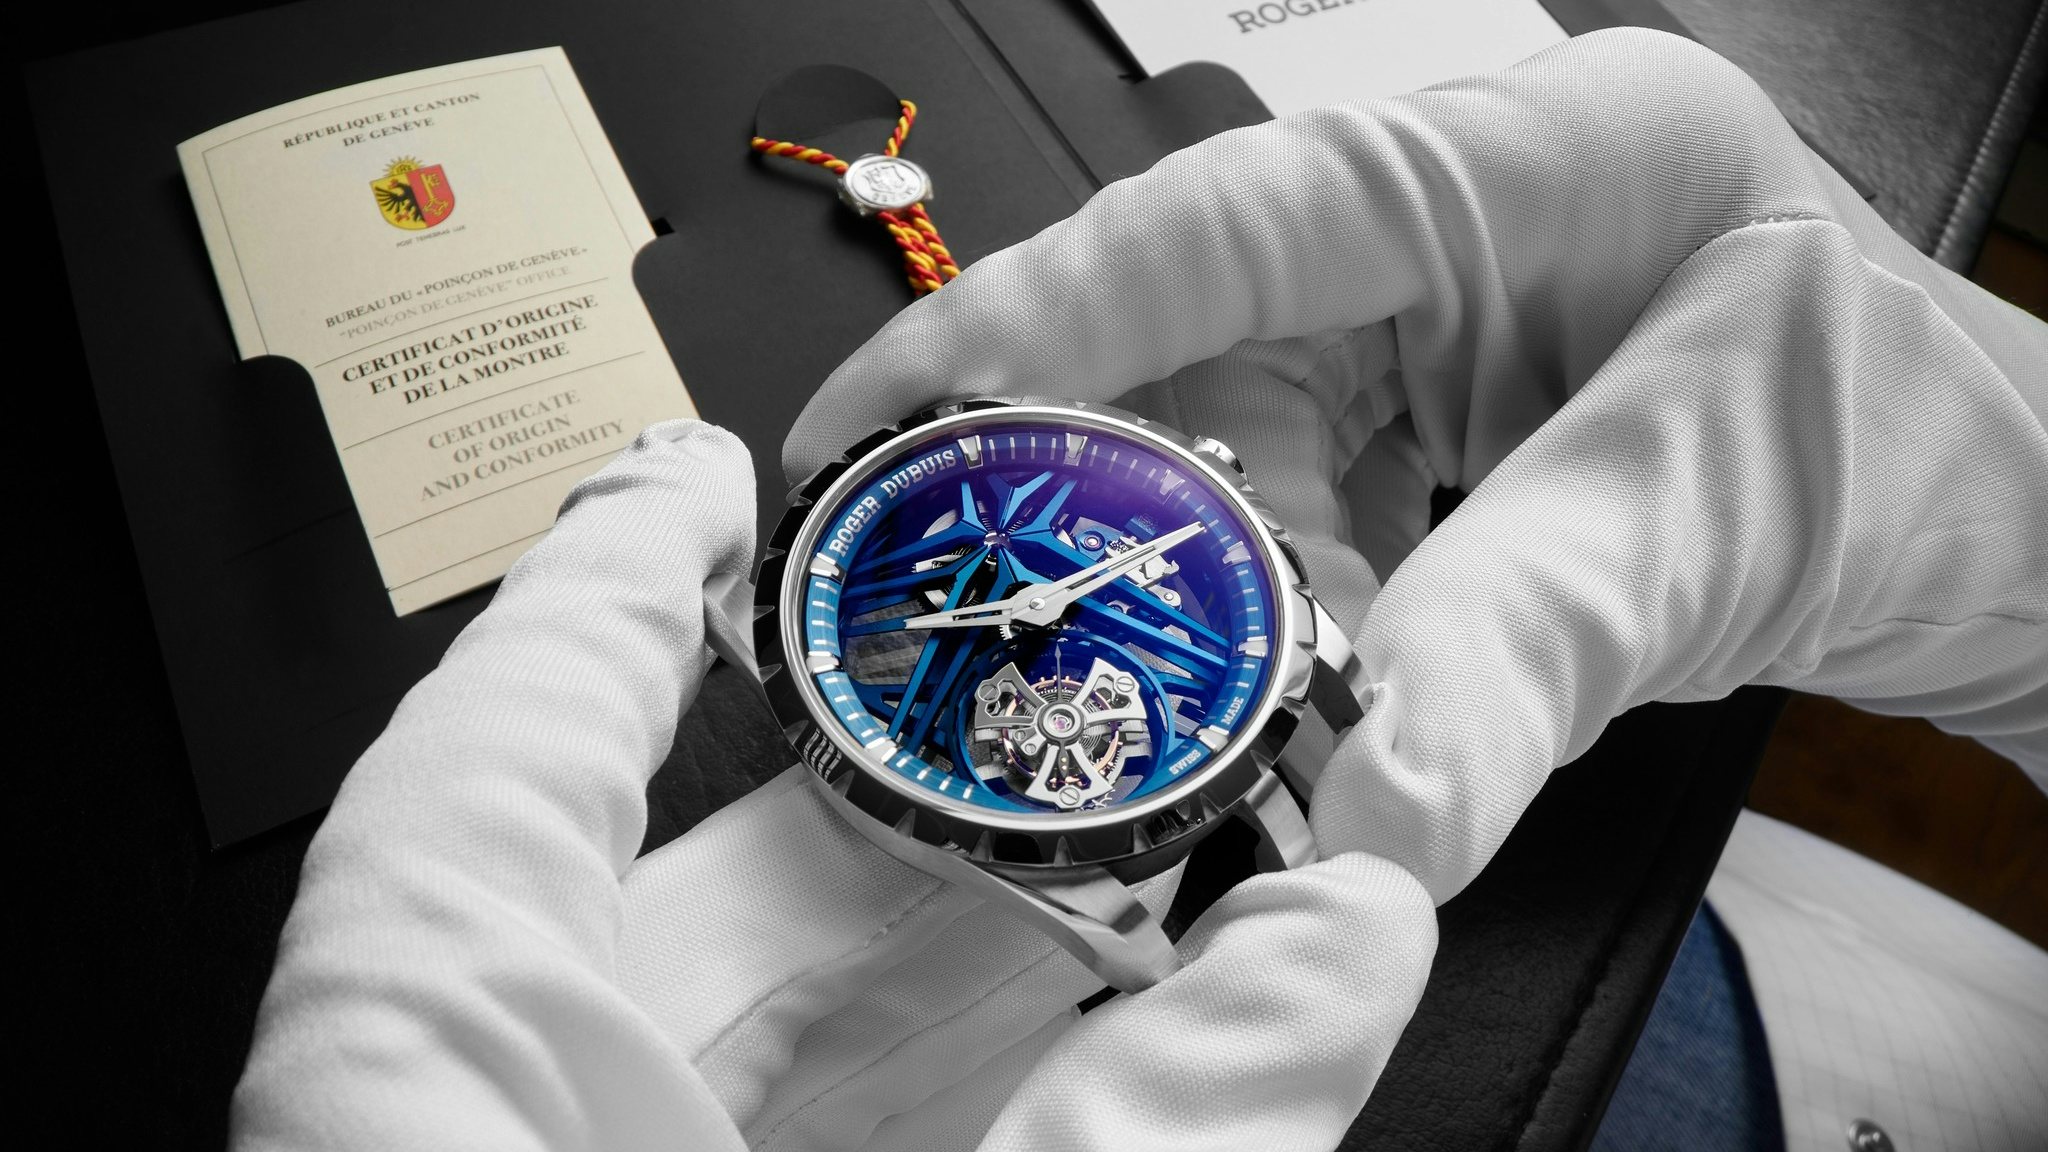 Demand for secondhand luxury watches is nearing a two-year low. Here's why the luxury watch market may be reaching a critical juncture. Photo: Roger Dubuis